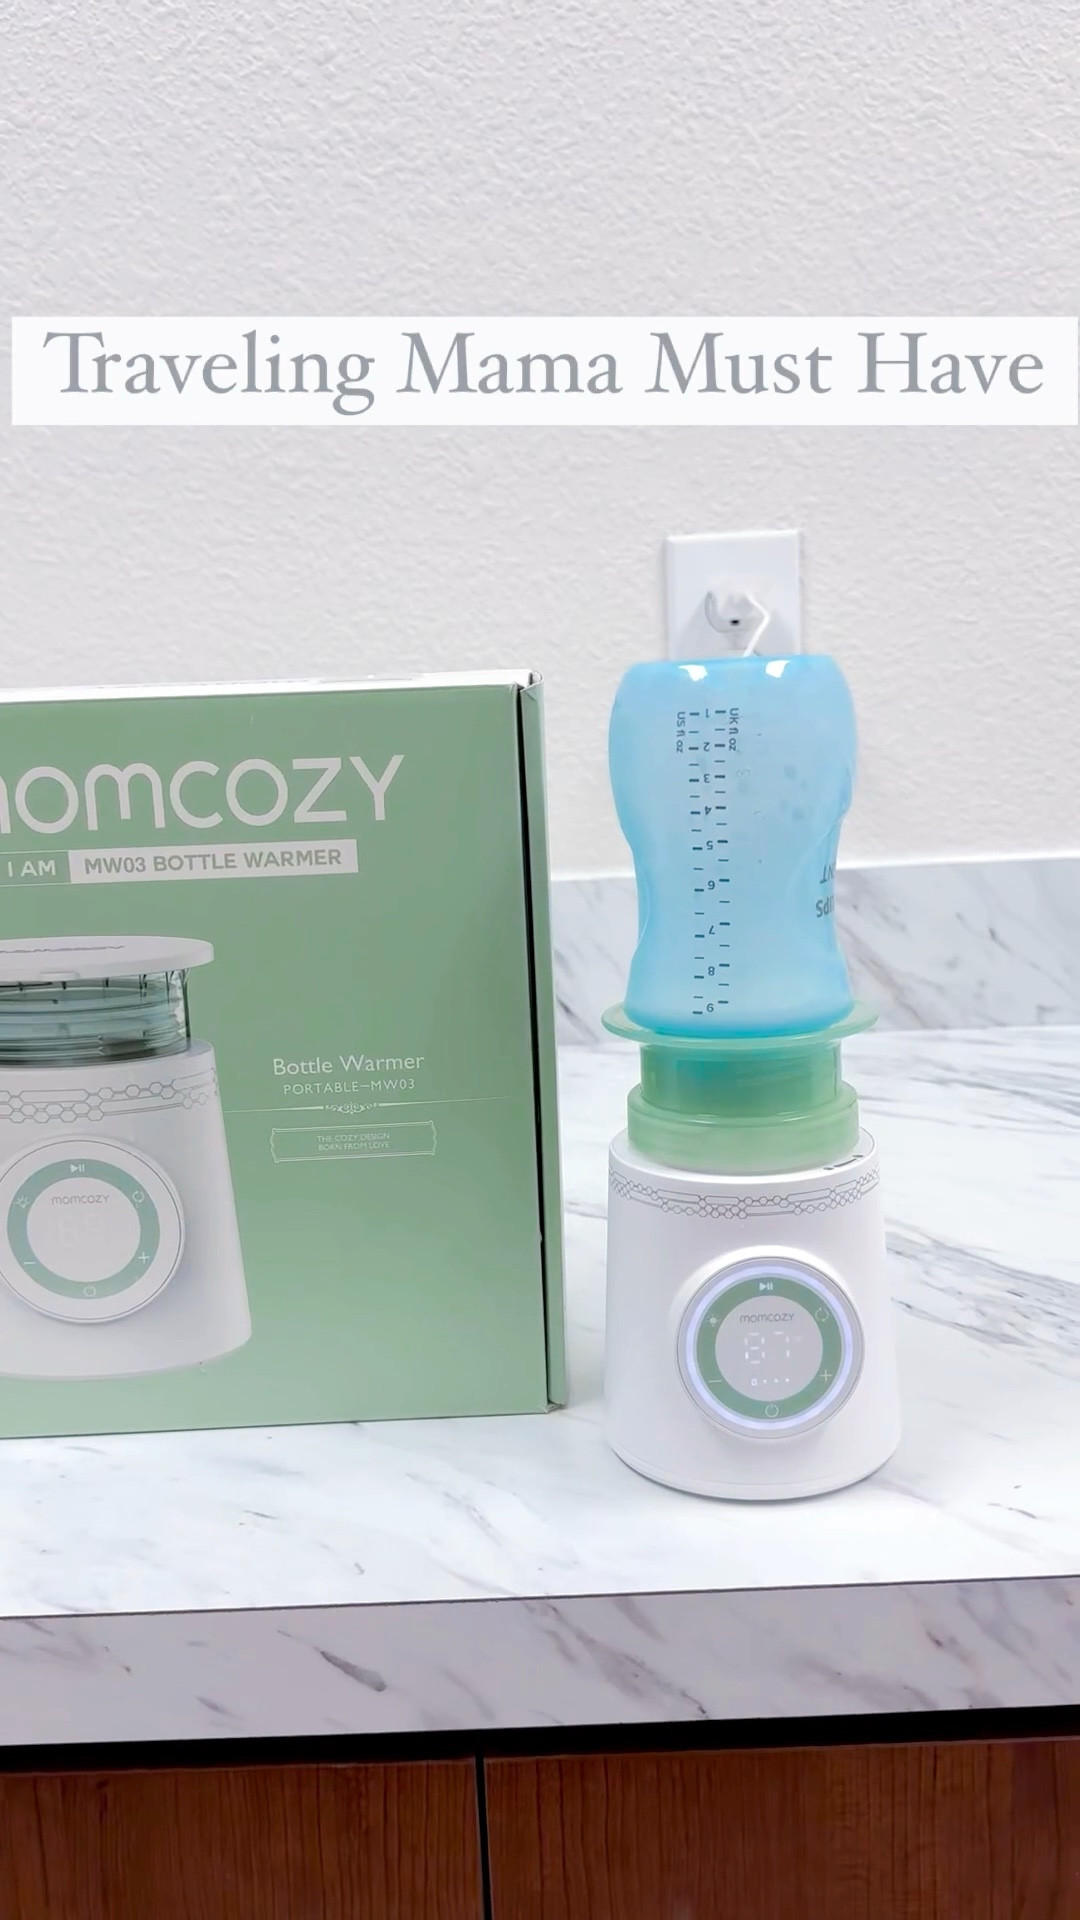 Momcozy S12 Pro Wearable Breast … curated on LTK